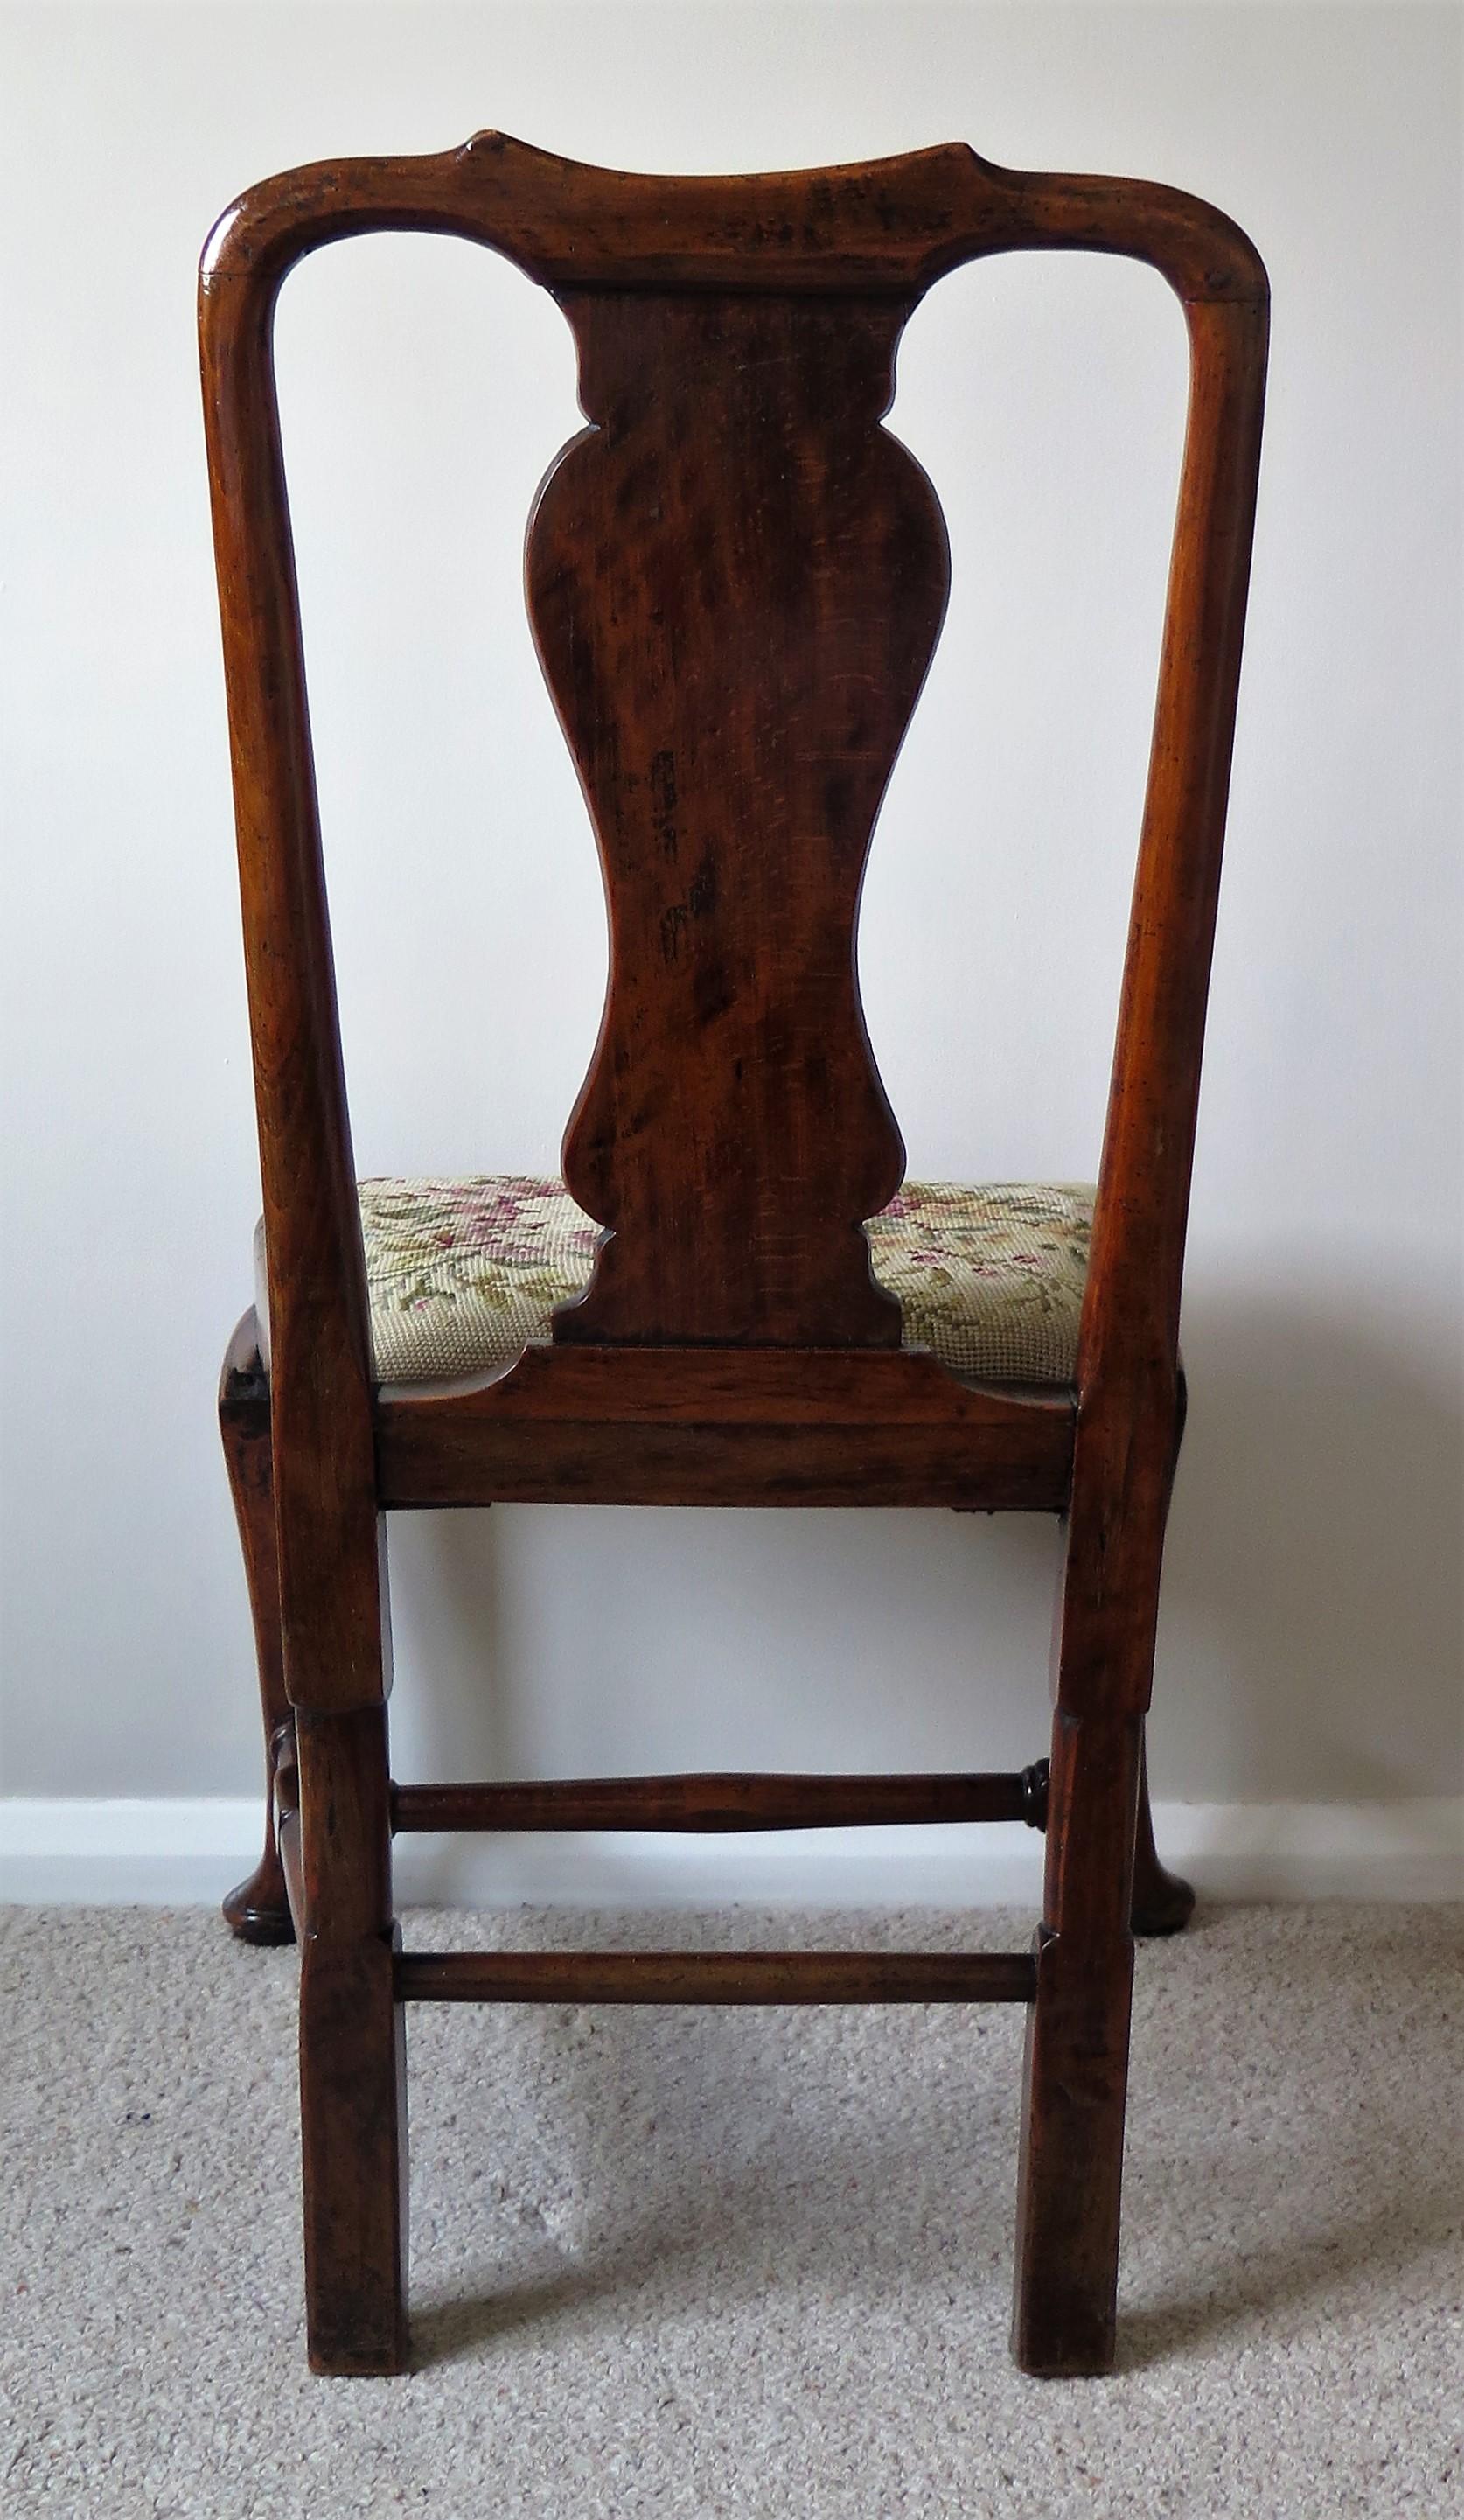 Queen Anne Period Walnut Chair Cabriole Legs and Stretchers, English circa 1700 In Fair Condition For Sale In Lincoln, Lincolnshire